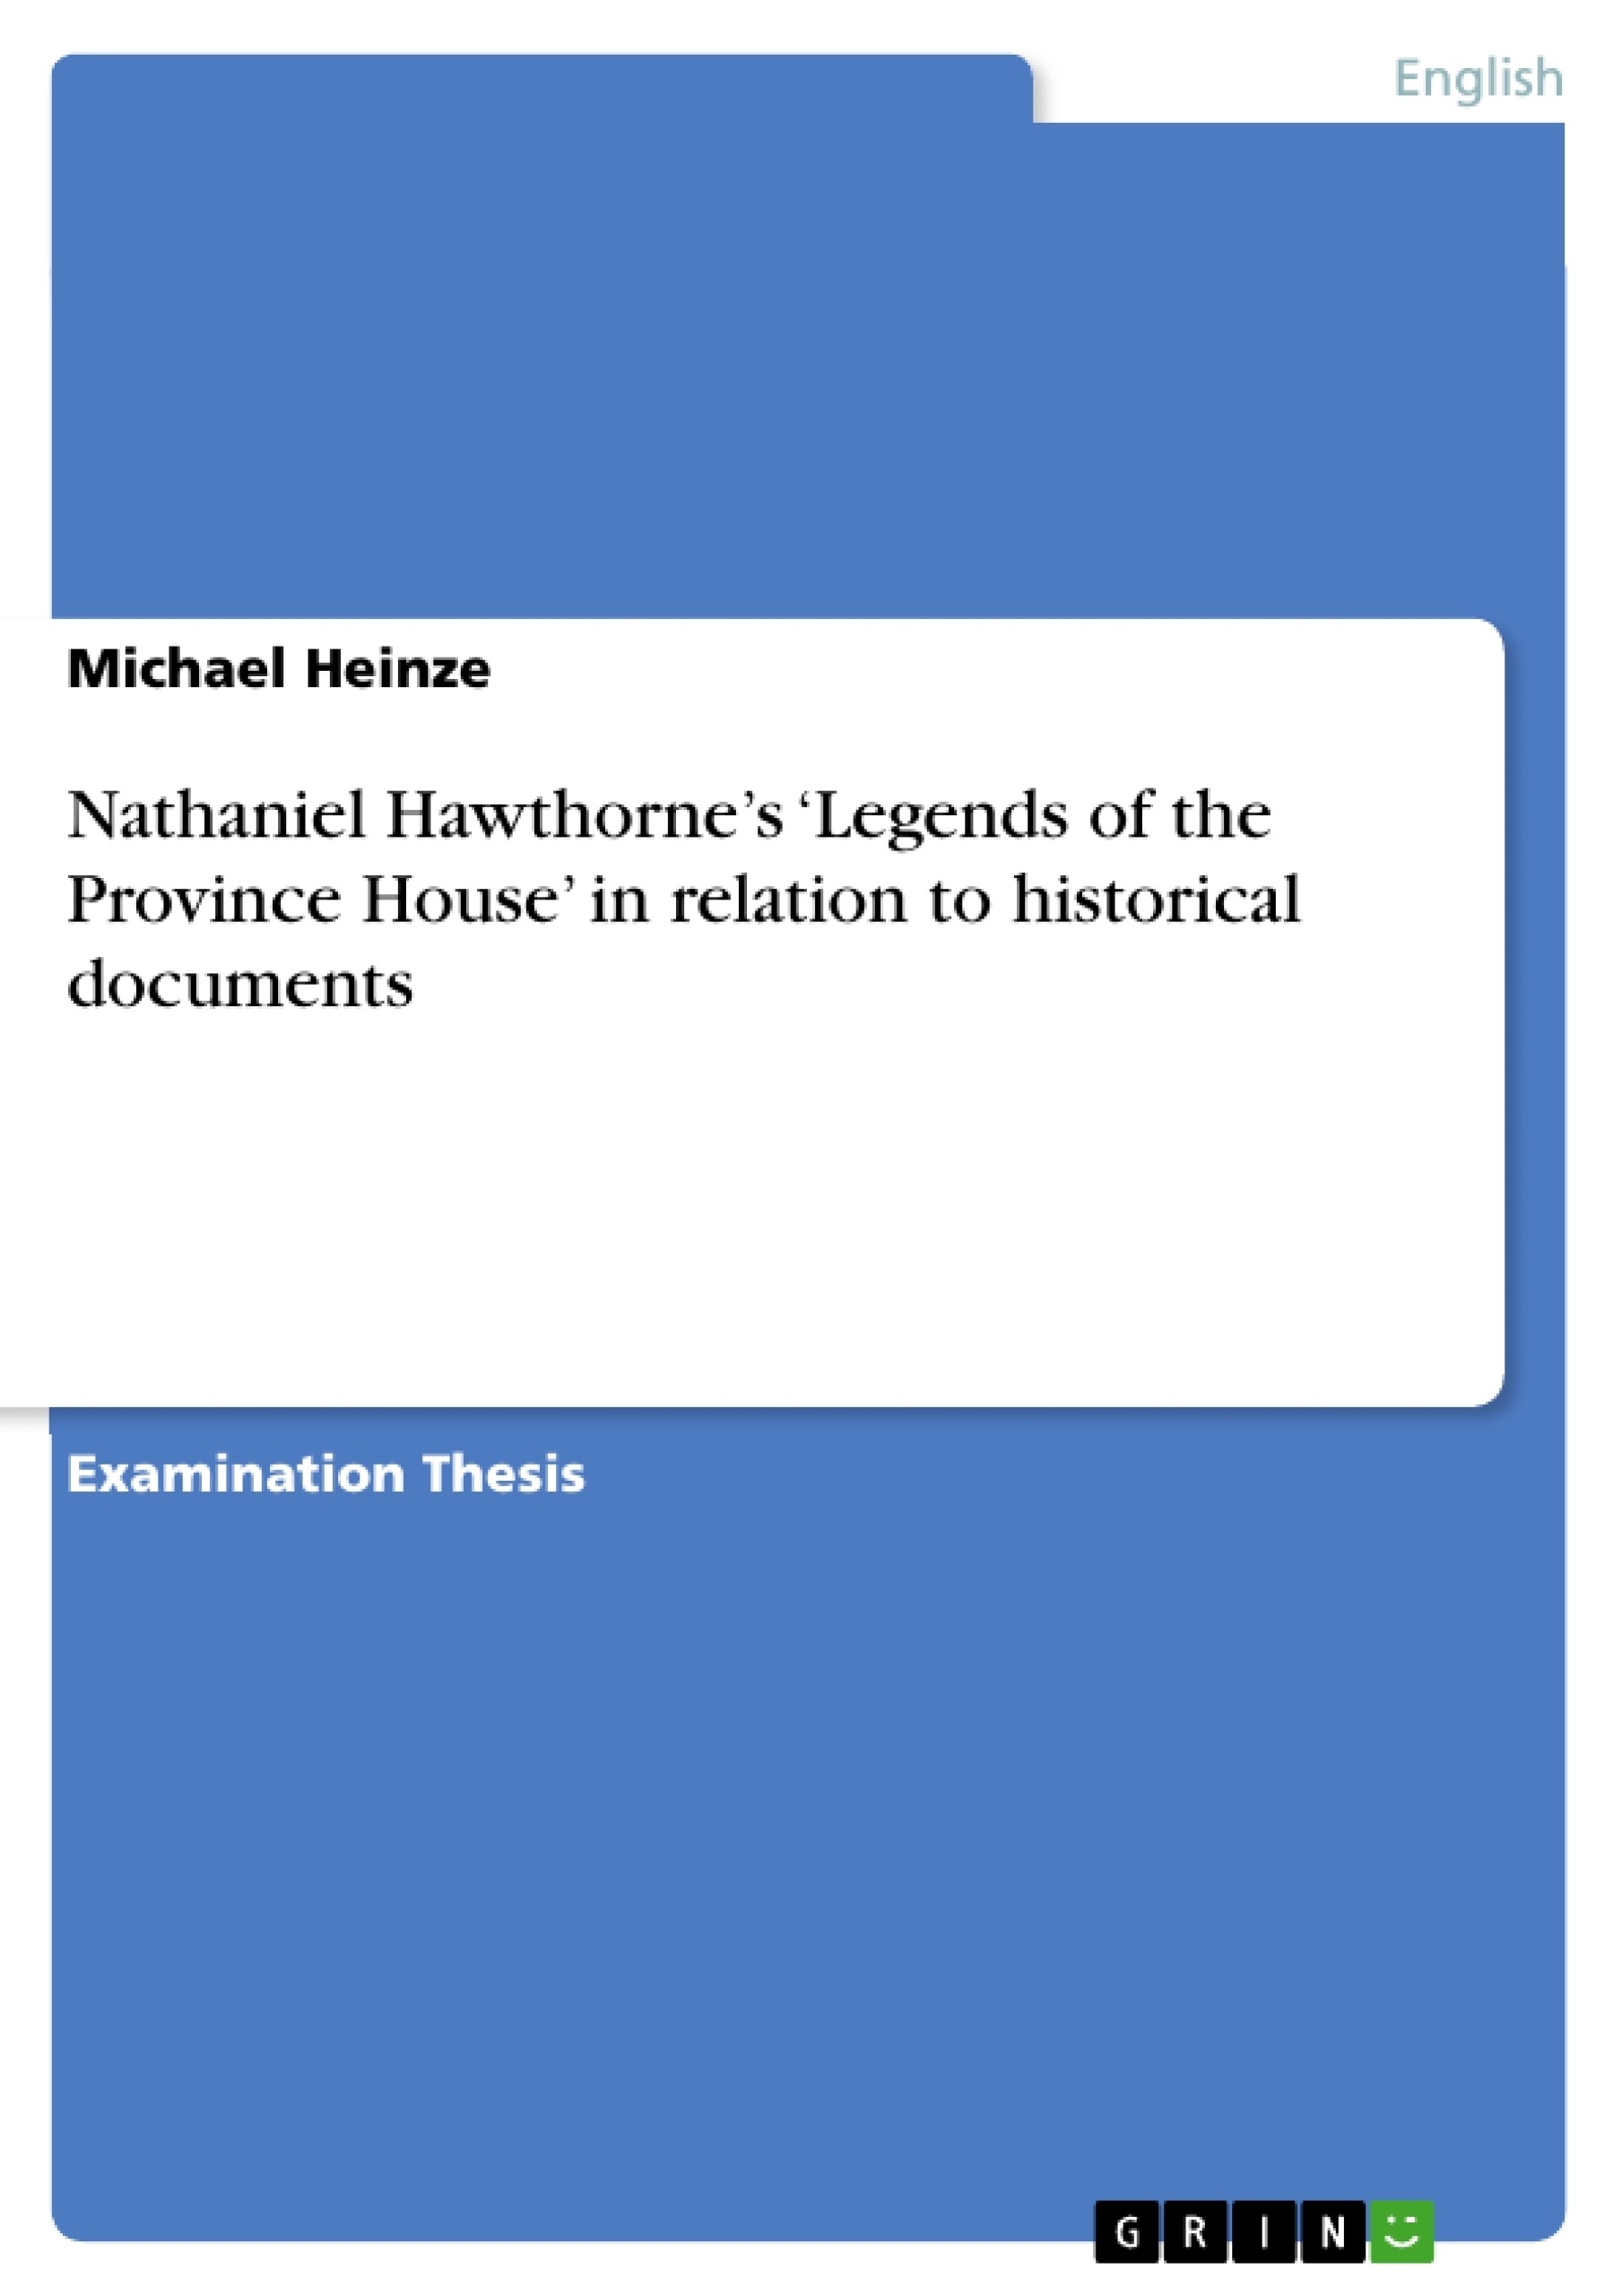 Title: Nathaniel Hawthorne’s ‘Legends of the Province House’ in relation to historical documents